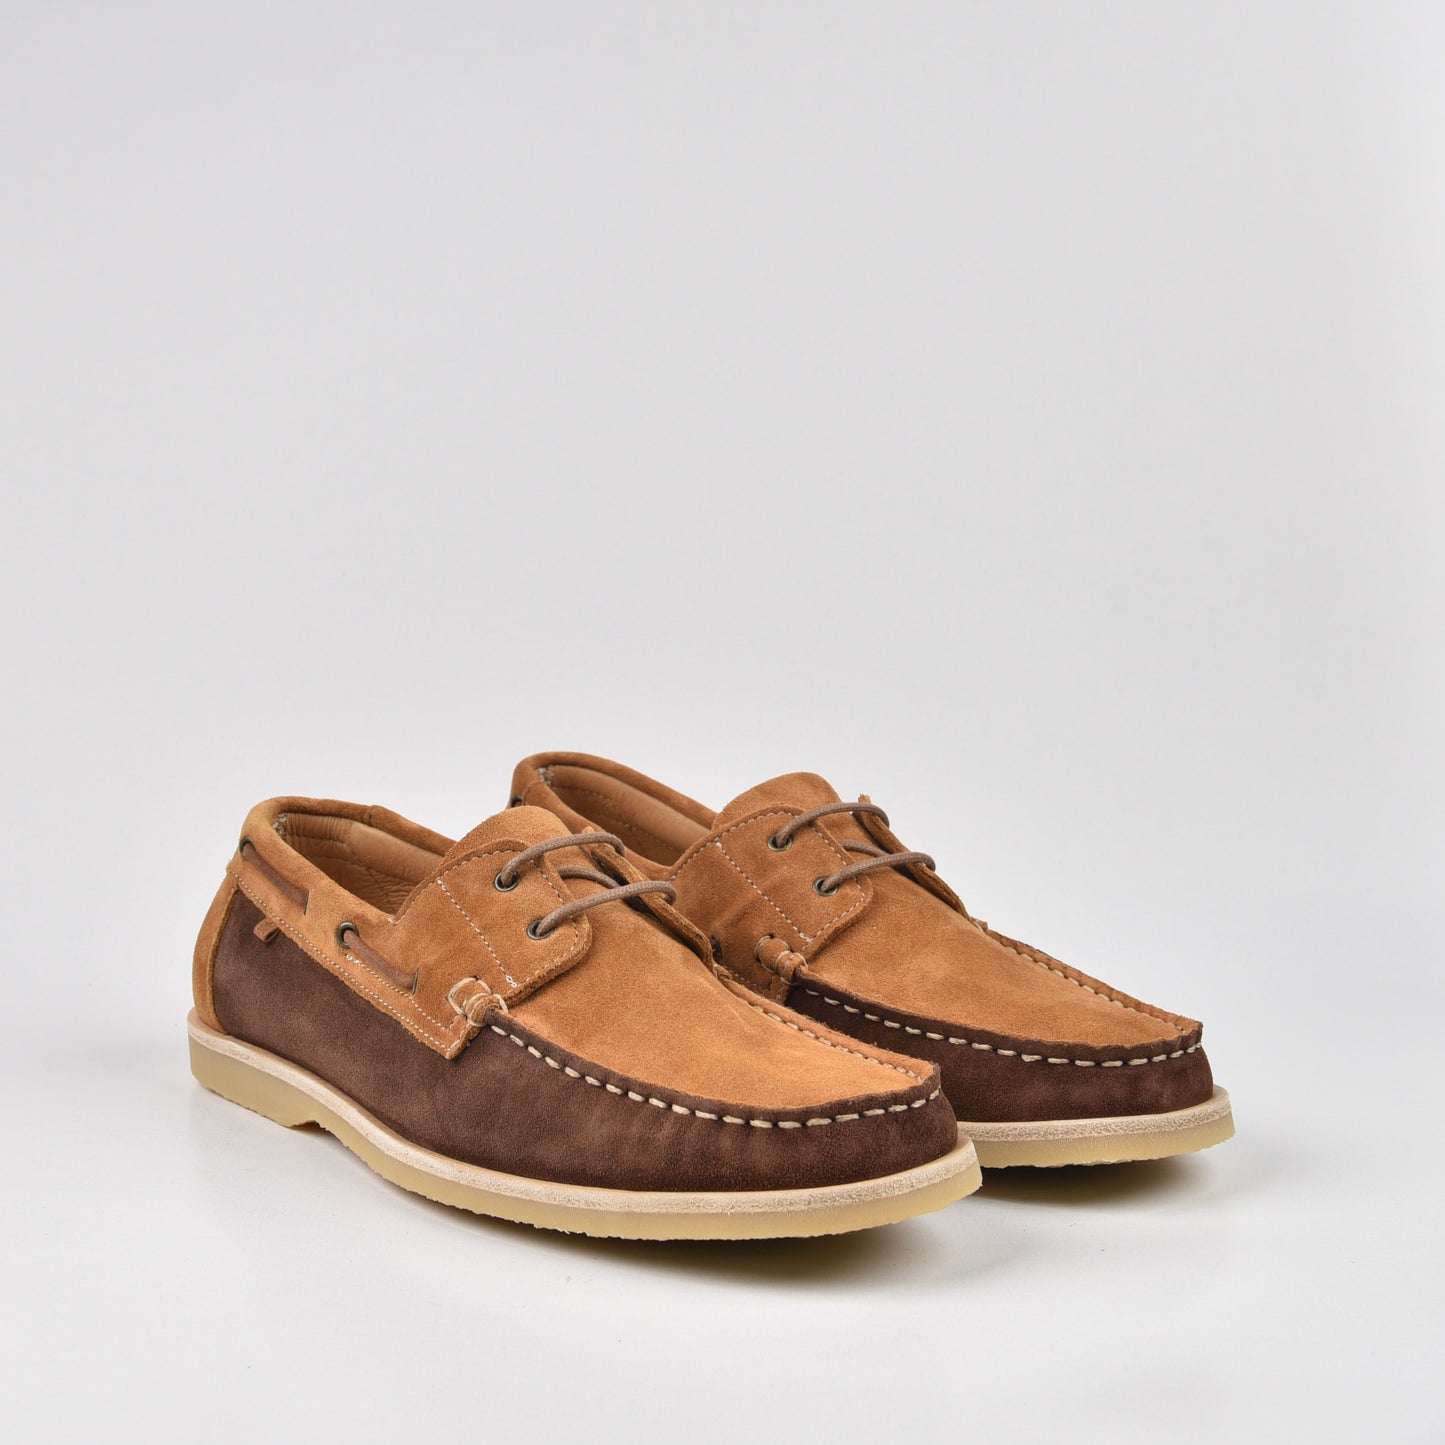 Art Spanish Loafers for Men in Chocolate suede camel.